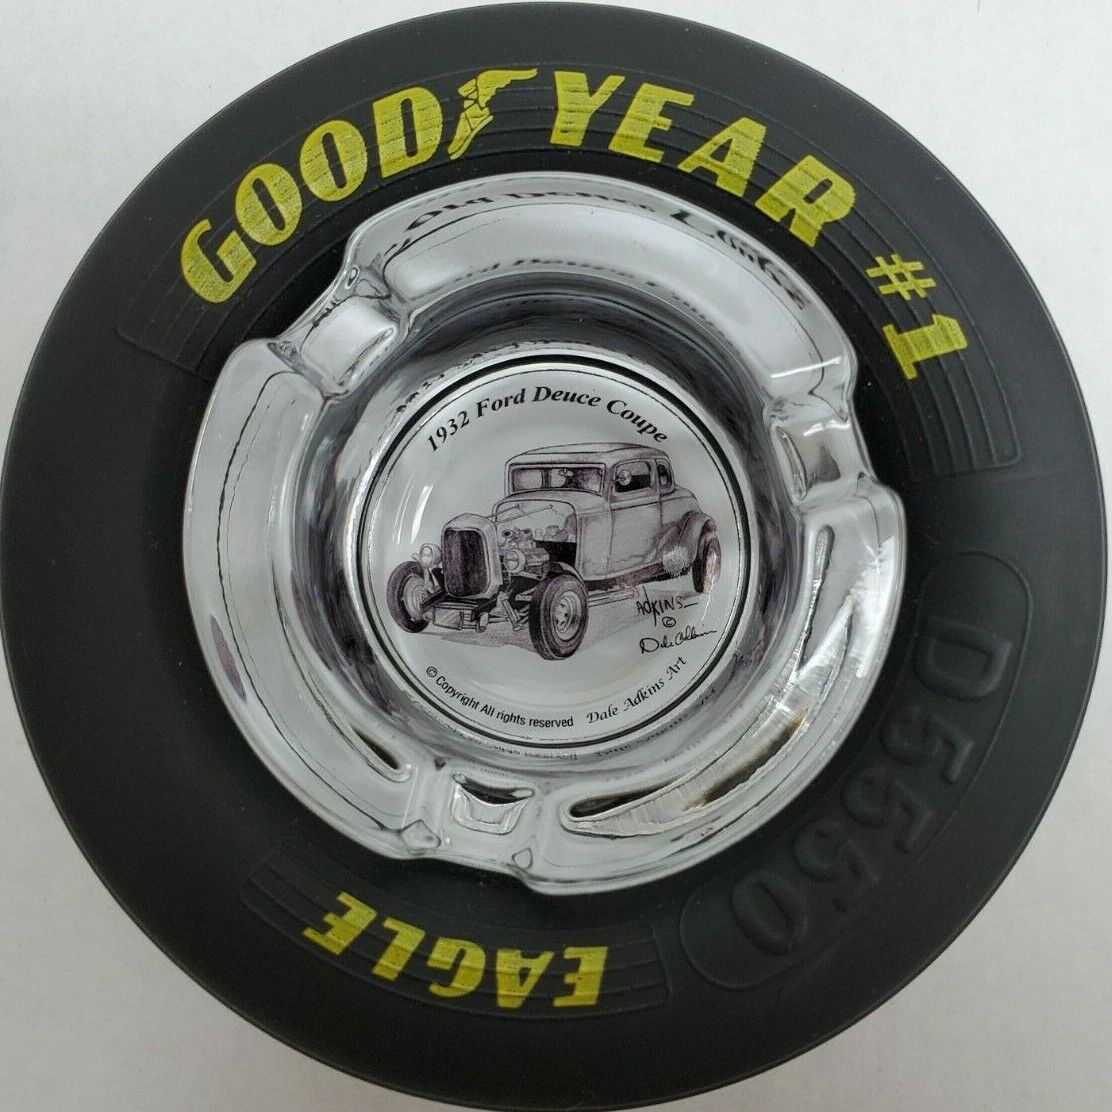 Goodyear Tire Ashtray-1932 Ford Deuce Coupe-New